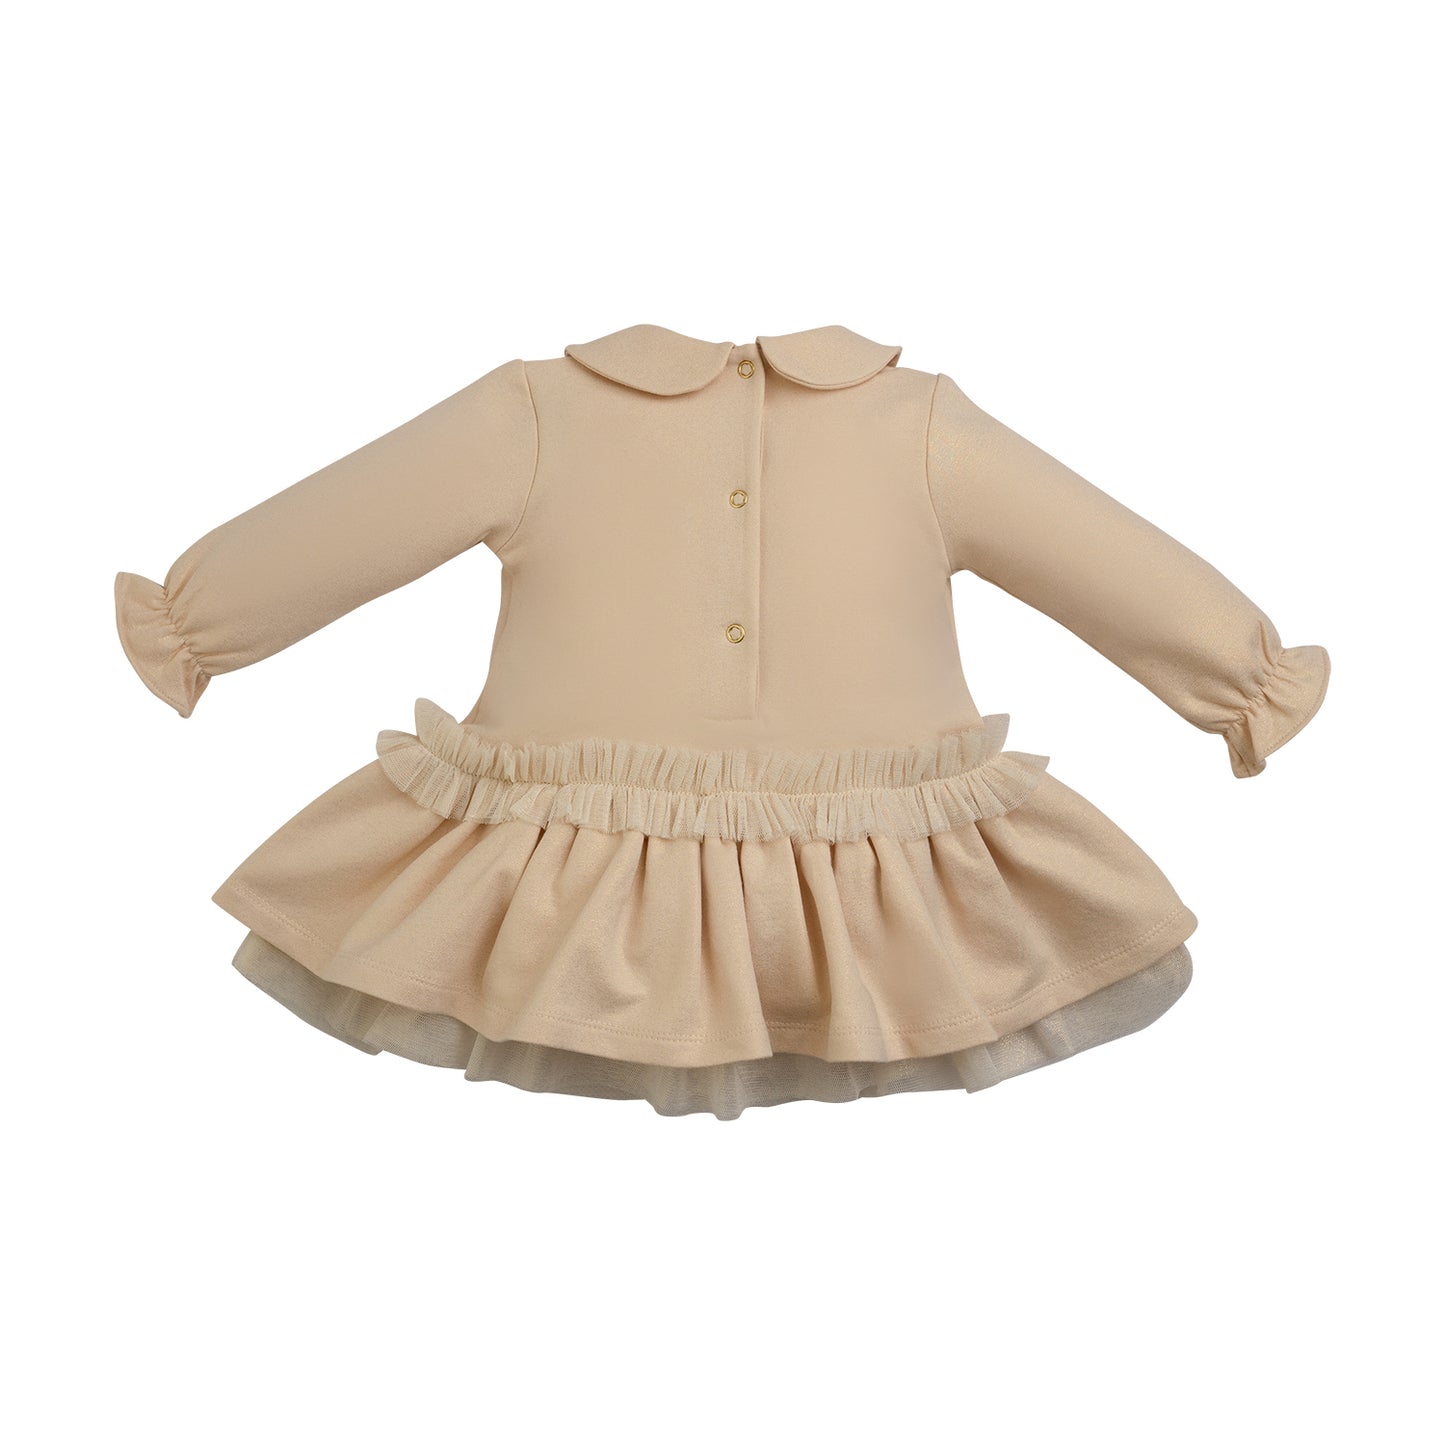 Girls Light Gold Sparkly Star Dress with Tulle Details 'FAYE'